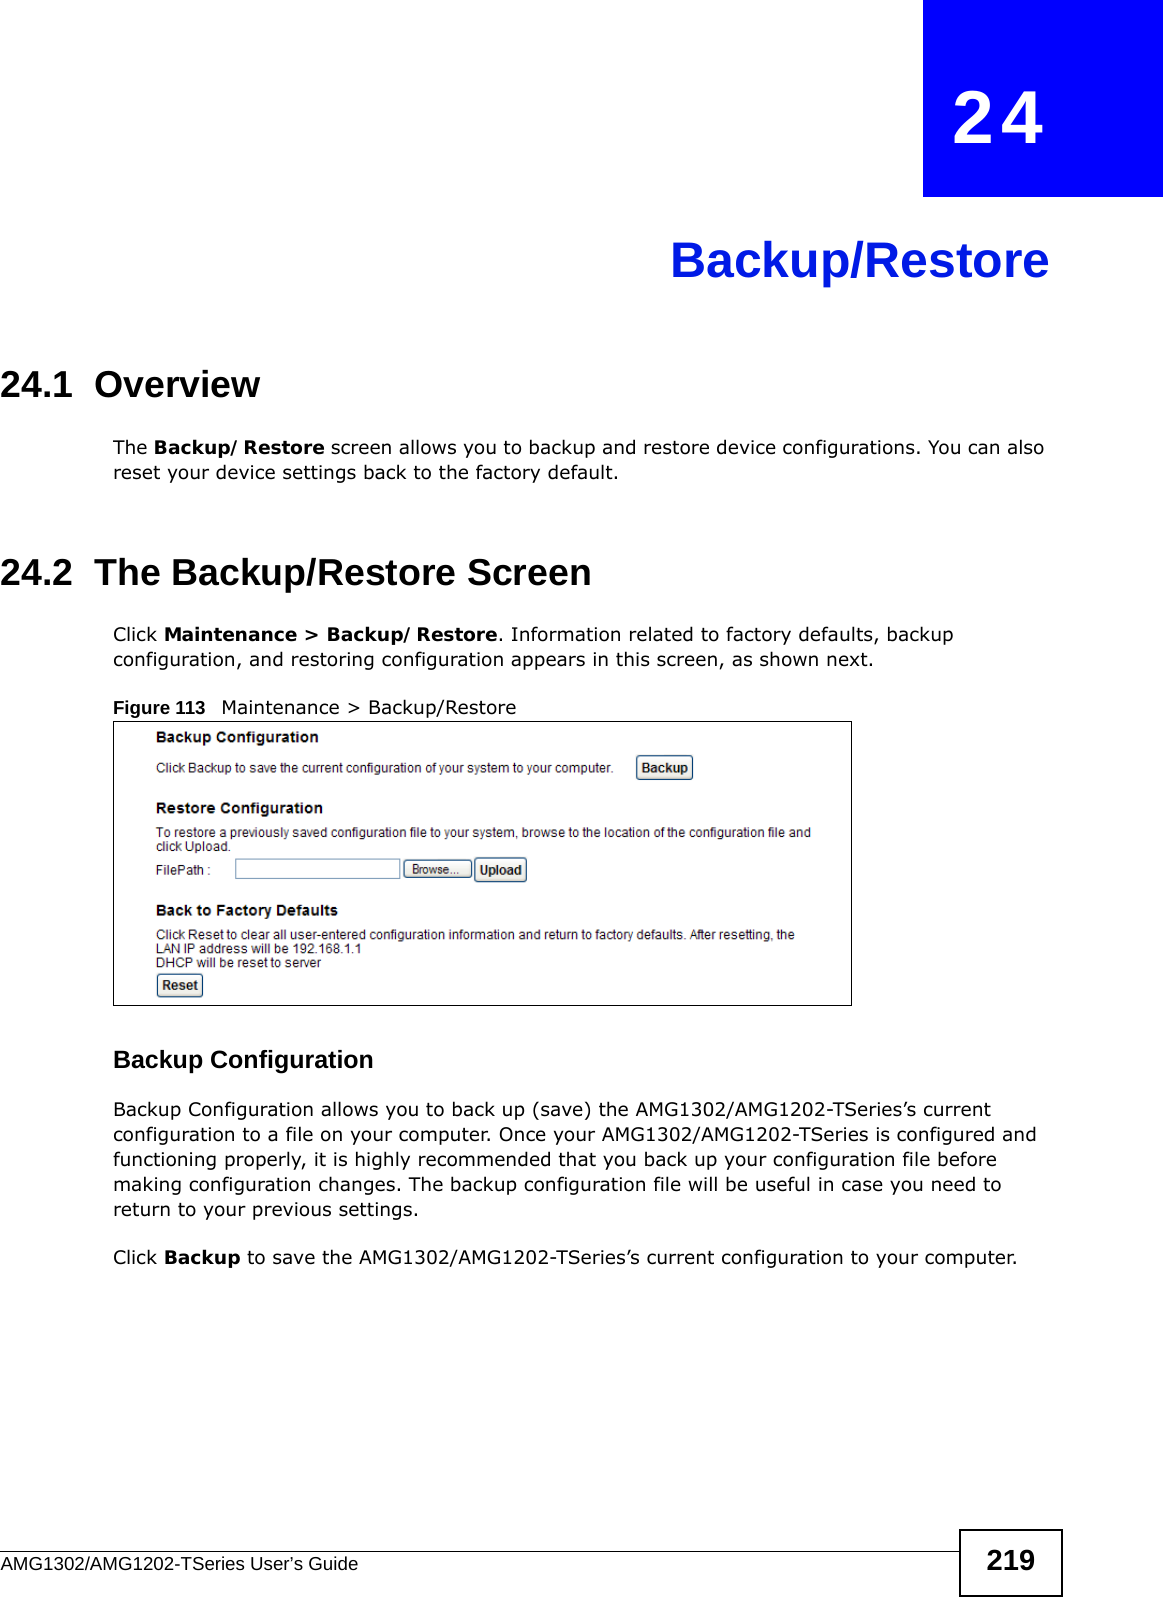 AMG1302/AMG1202-TSeries User’s Guide 219CHAPTER   24Backup/Restore24.1  OverviewThe Backup/Restore screen allows you to backup and restore device configurations. You can also reset your device settings back to the factory default.24.2  The Backup/Restore Screen Click Maintenance &gt; Backup/Restore. Information related to factory defaults, backup configuration, and restoring configuration appears in this screen, as shown next.Figure 113   Maintenance &gt; Backup/RestoreBackup Configuration Backup Configuration allows you to back up (save) the AMG1302/AMG1202-TSeries’s current configuration to a file on your computer. Once your AMG1302/AMG1202-TSeries is configured and functioning properly, it is highly recommended that you back up your configuration file before making configuration changes. The backup configuration file will be useful in case you need to return to your previous settings. Click Backup to save the AMG1302/AMG1202-TSeries’s current configuration to your computer.